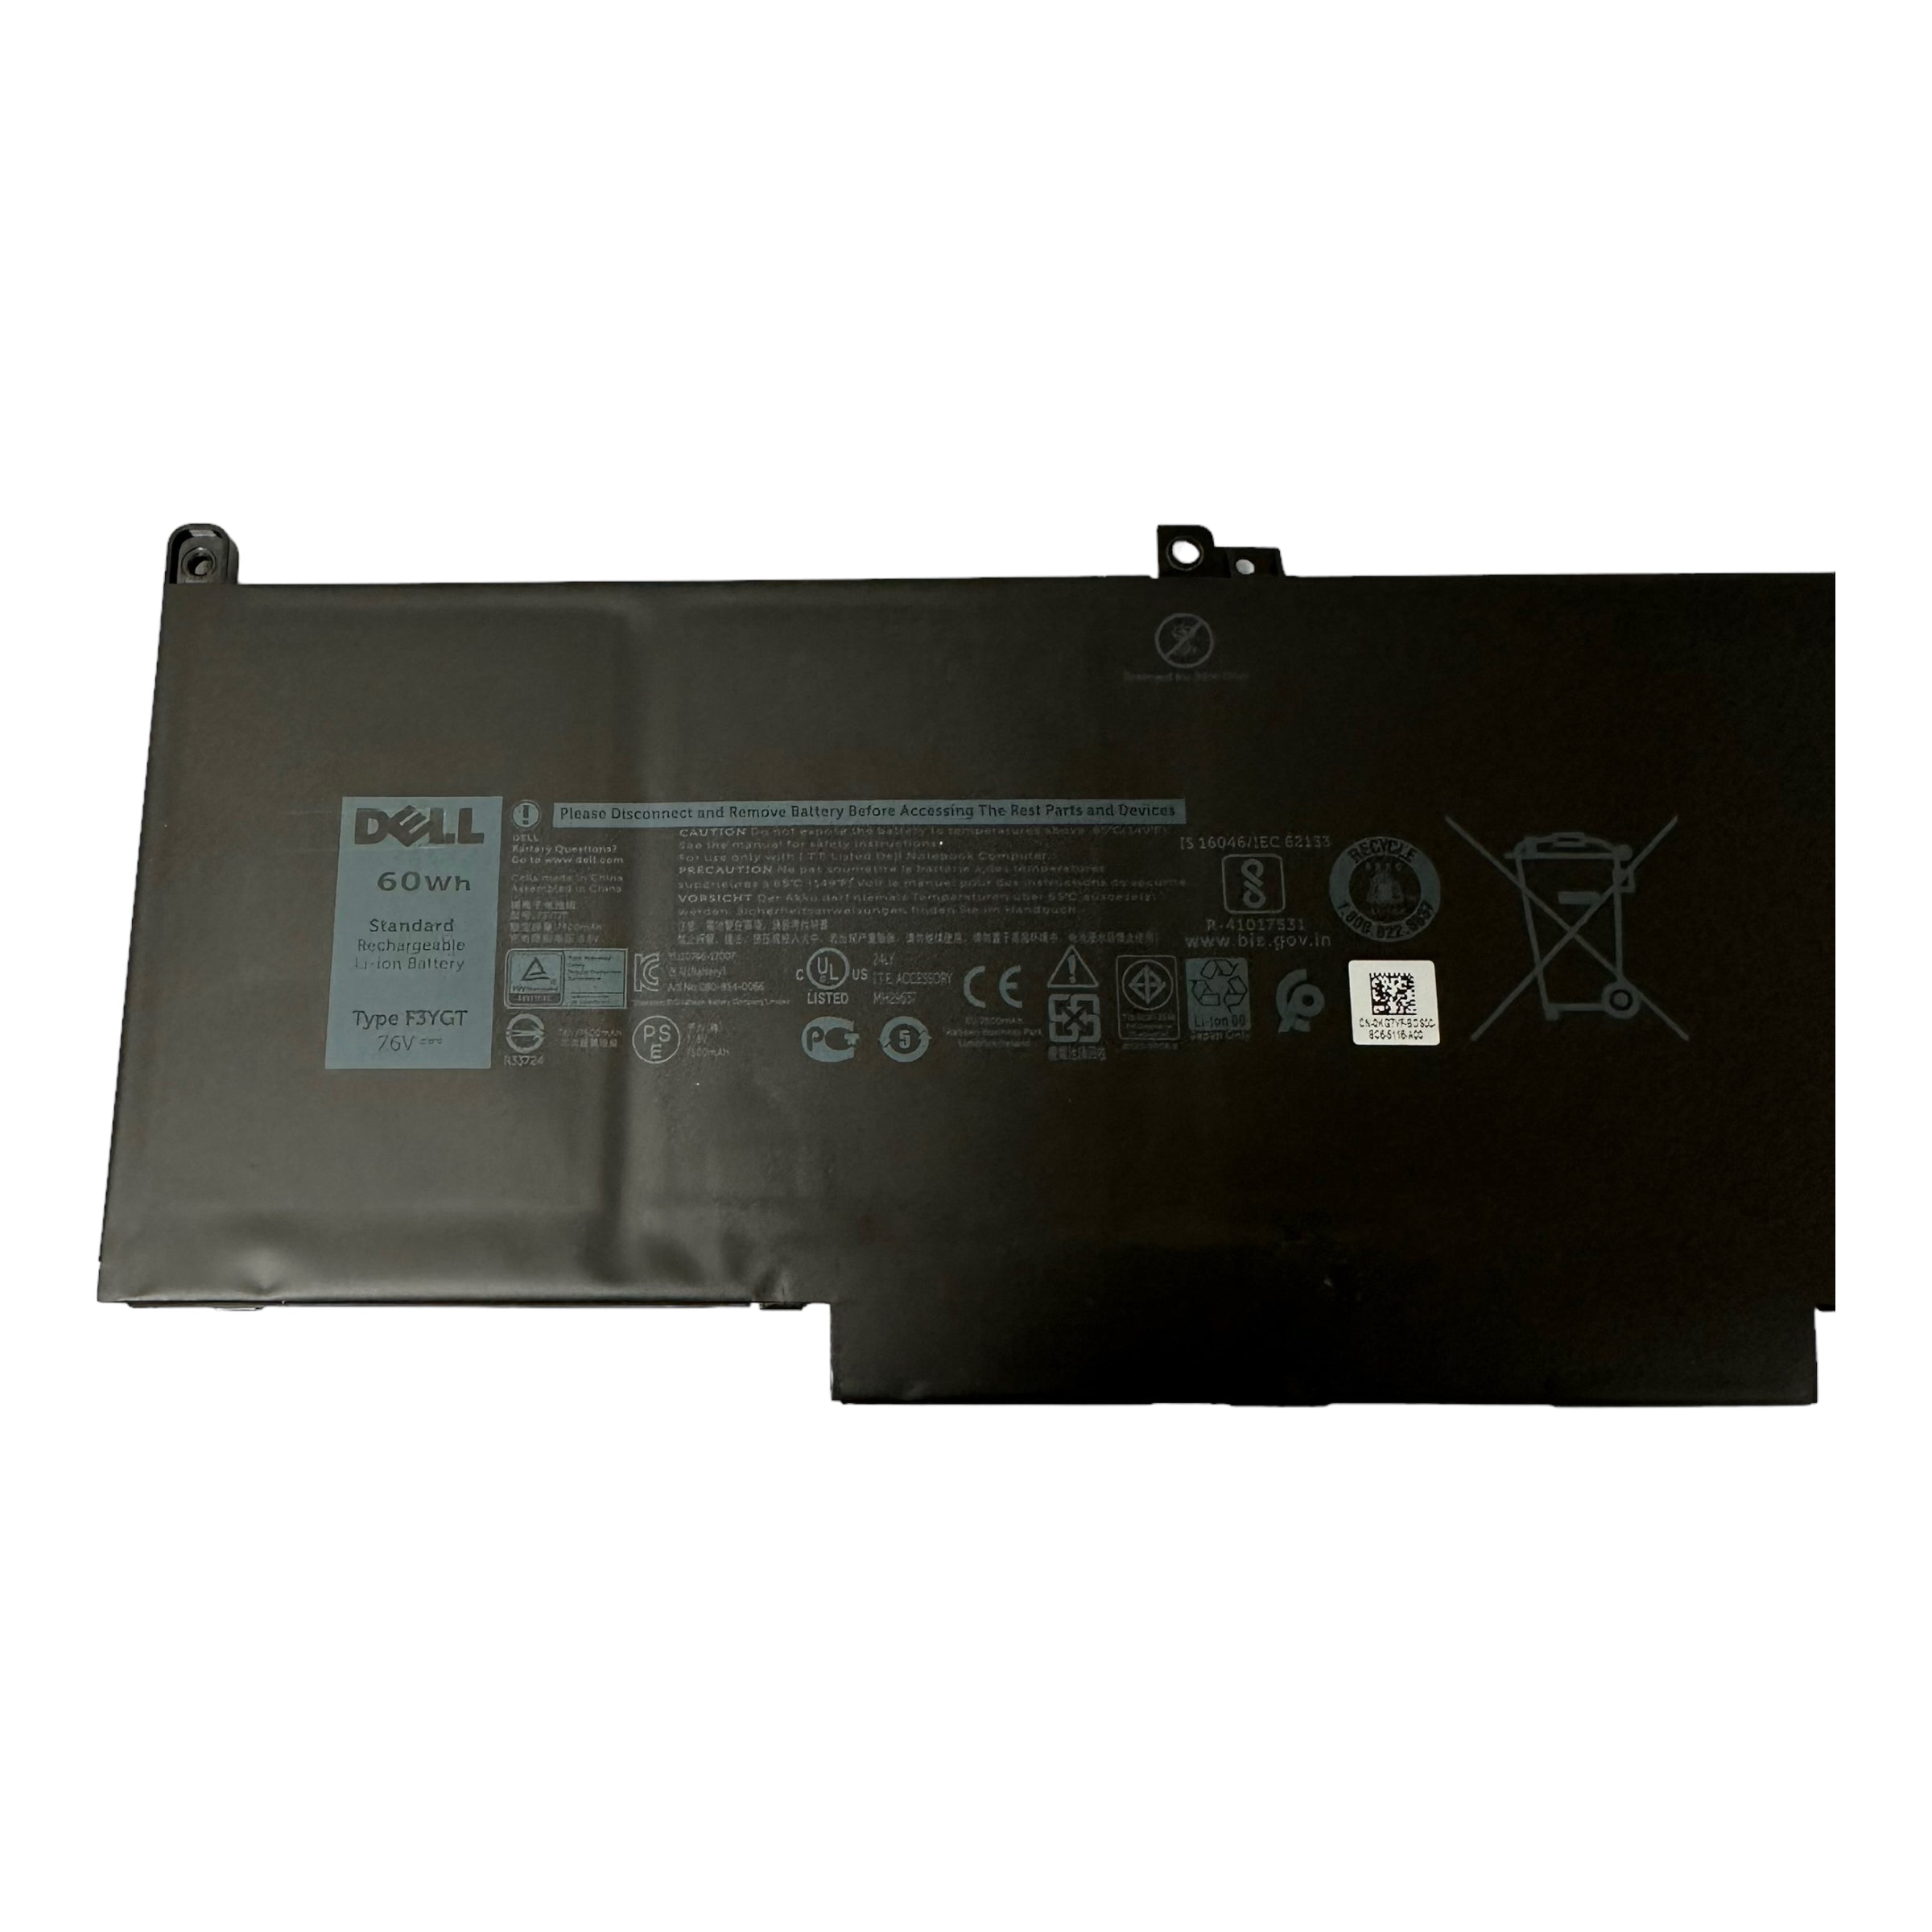 100% GENUINE Dell Latitude 7280 7480 7.6V 60Whr 4-Cell Battery F3YGT